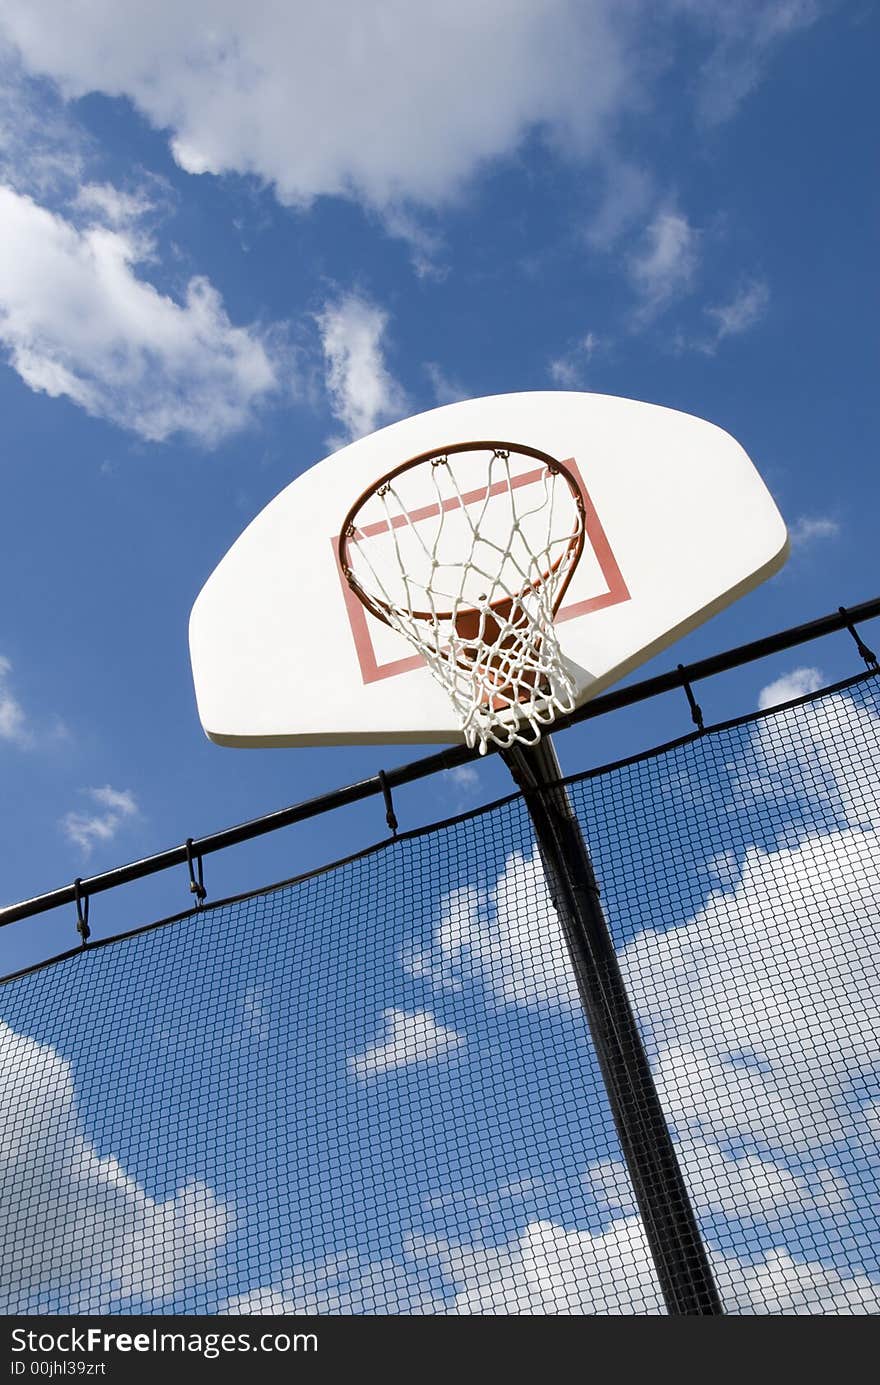 A basketball hoop in a children's playground stands against a partly cloudy blue sky.